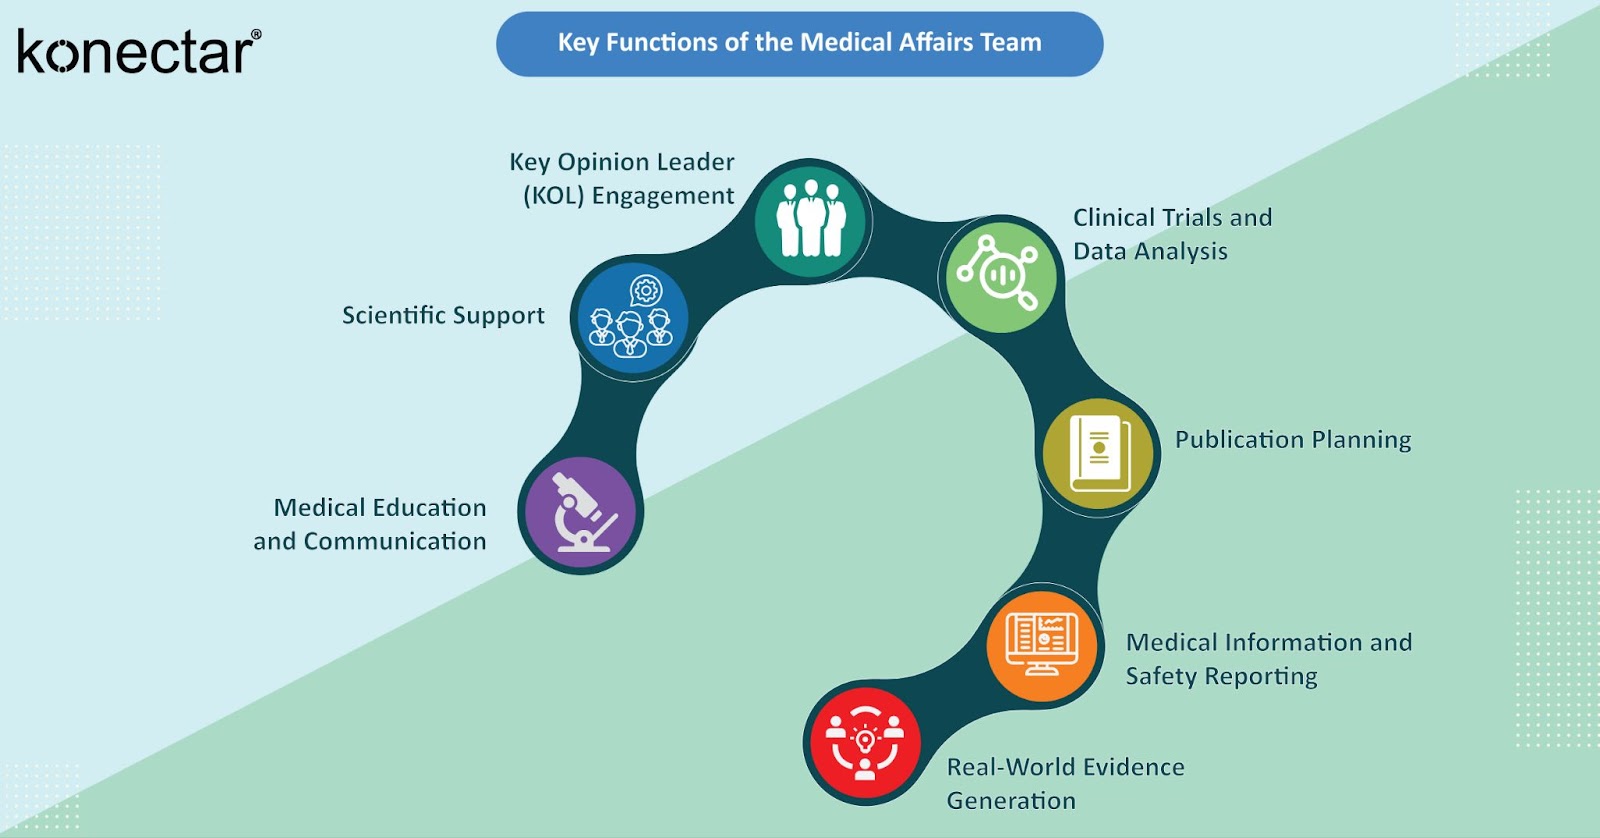 Functions of the Medical Affairs Team